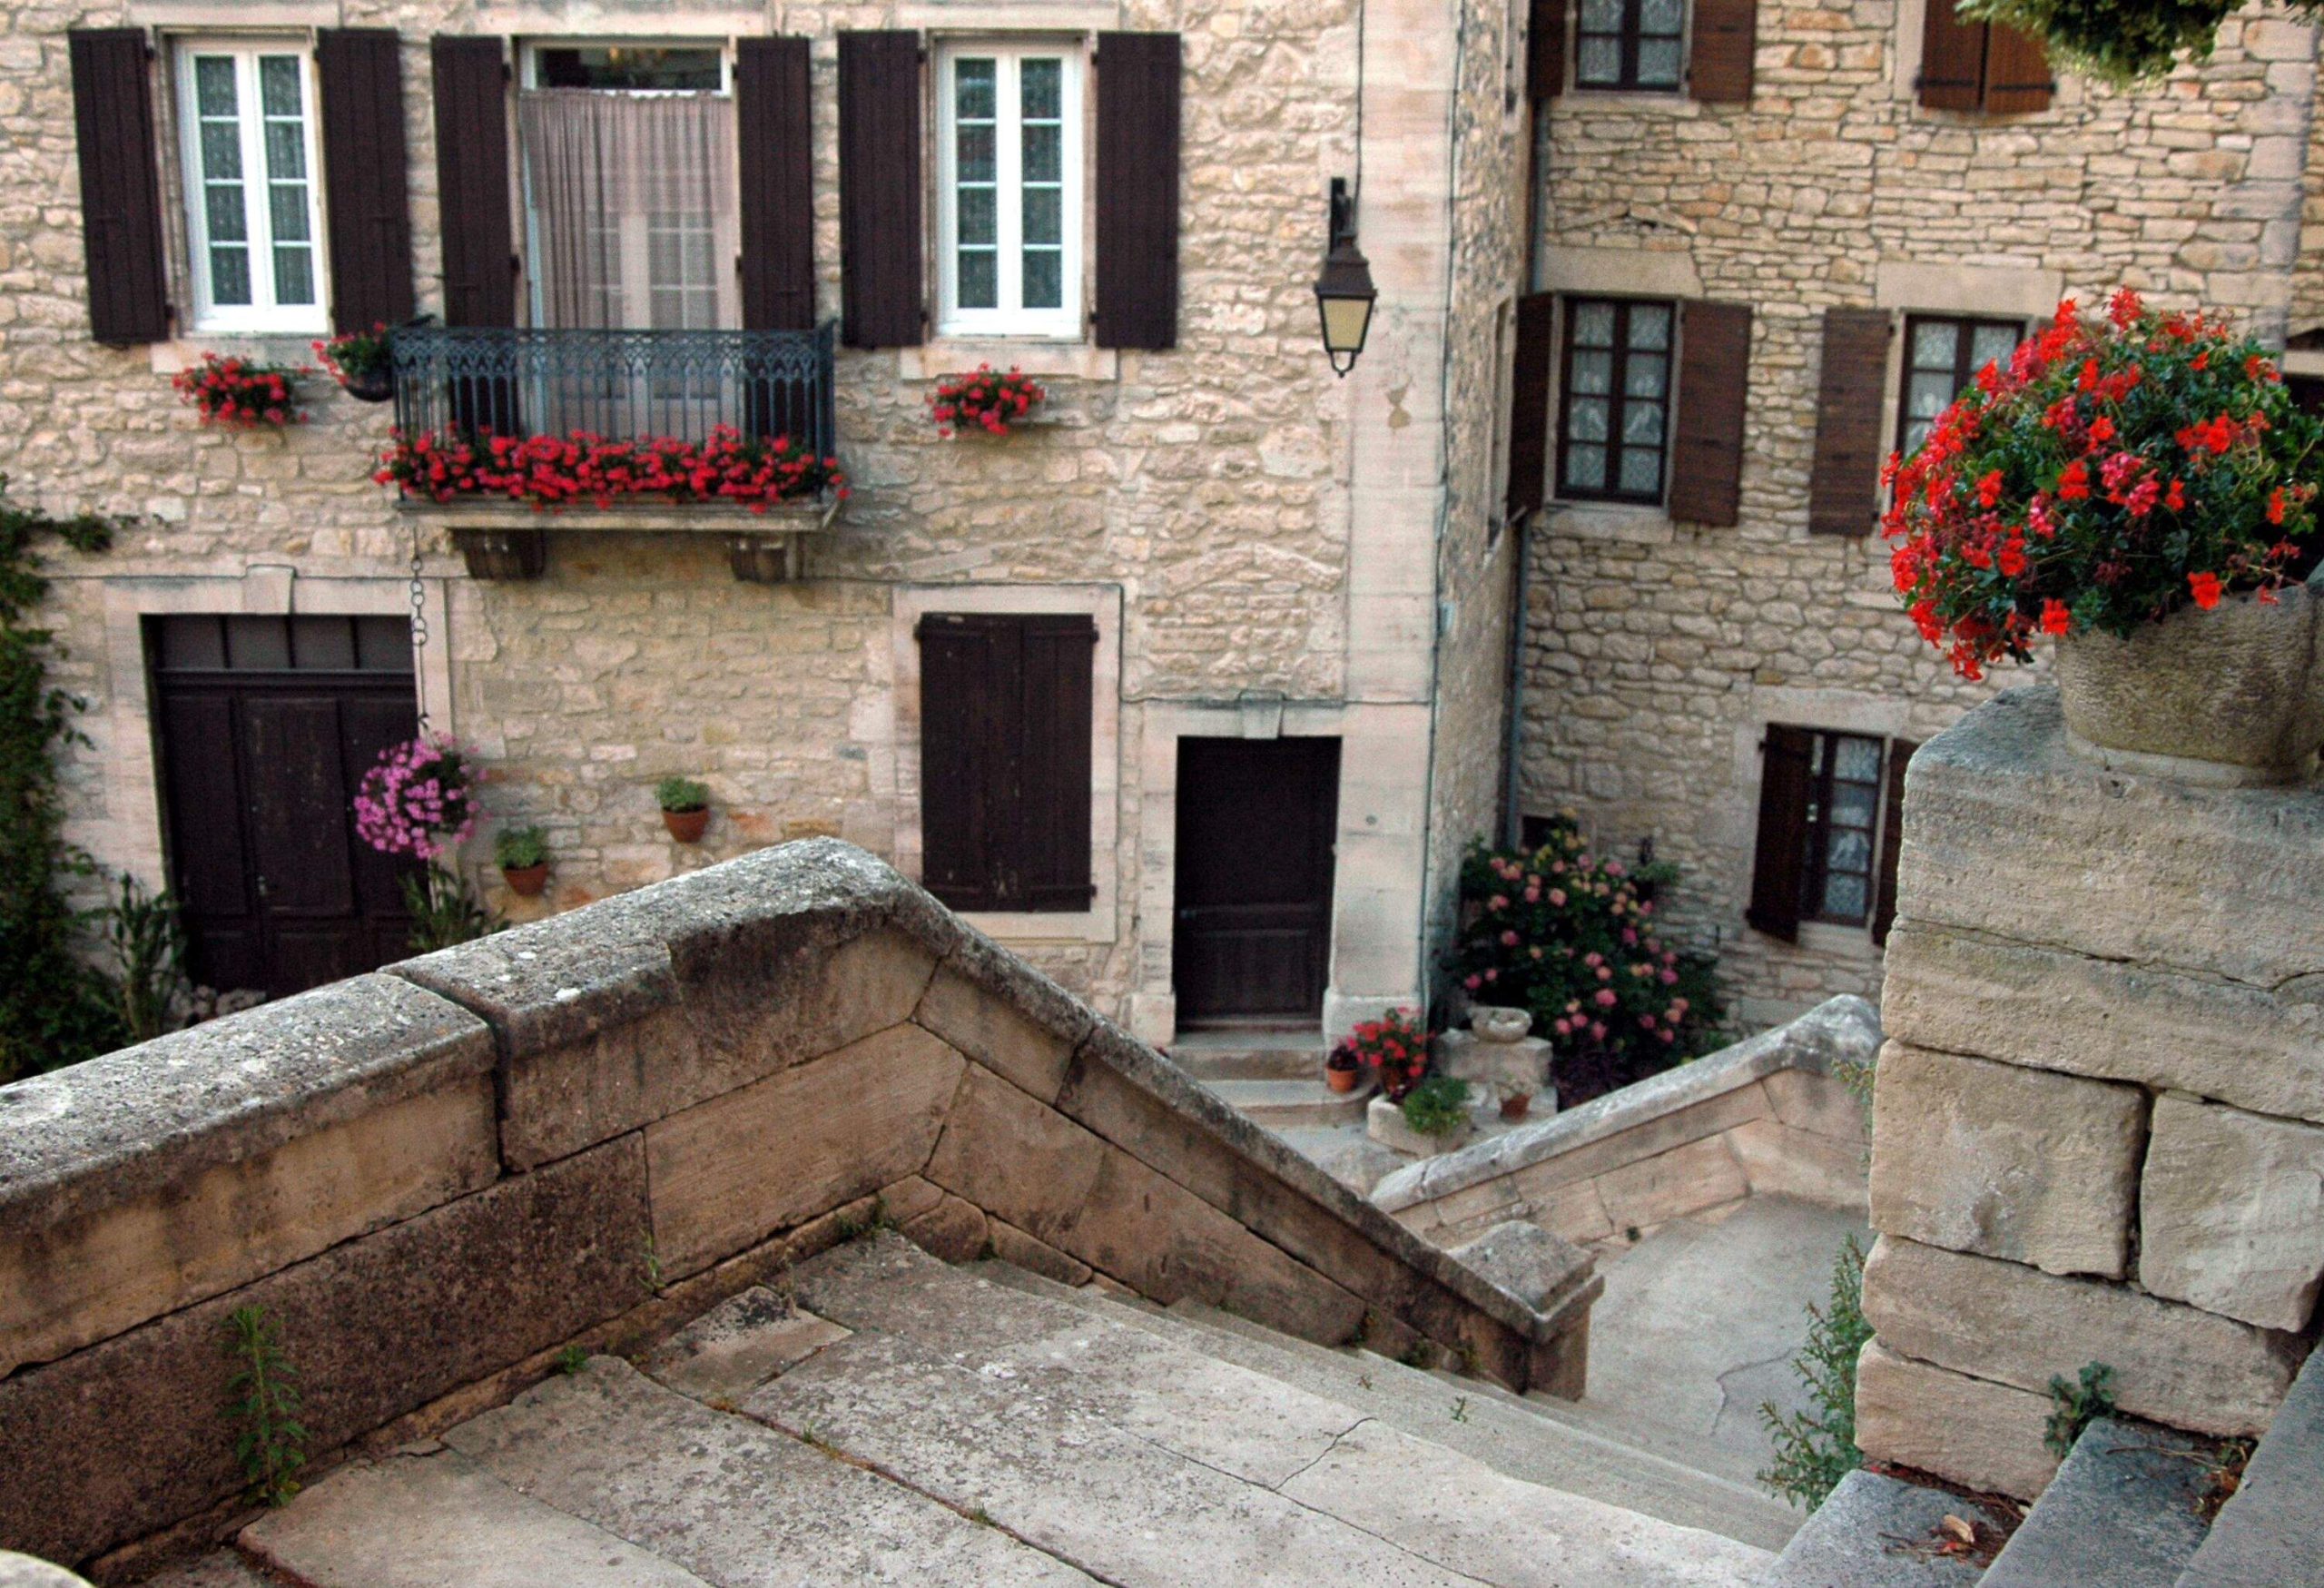 The historic village of Barjac, France. Looking down the stairs.